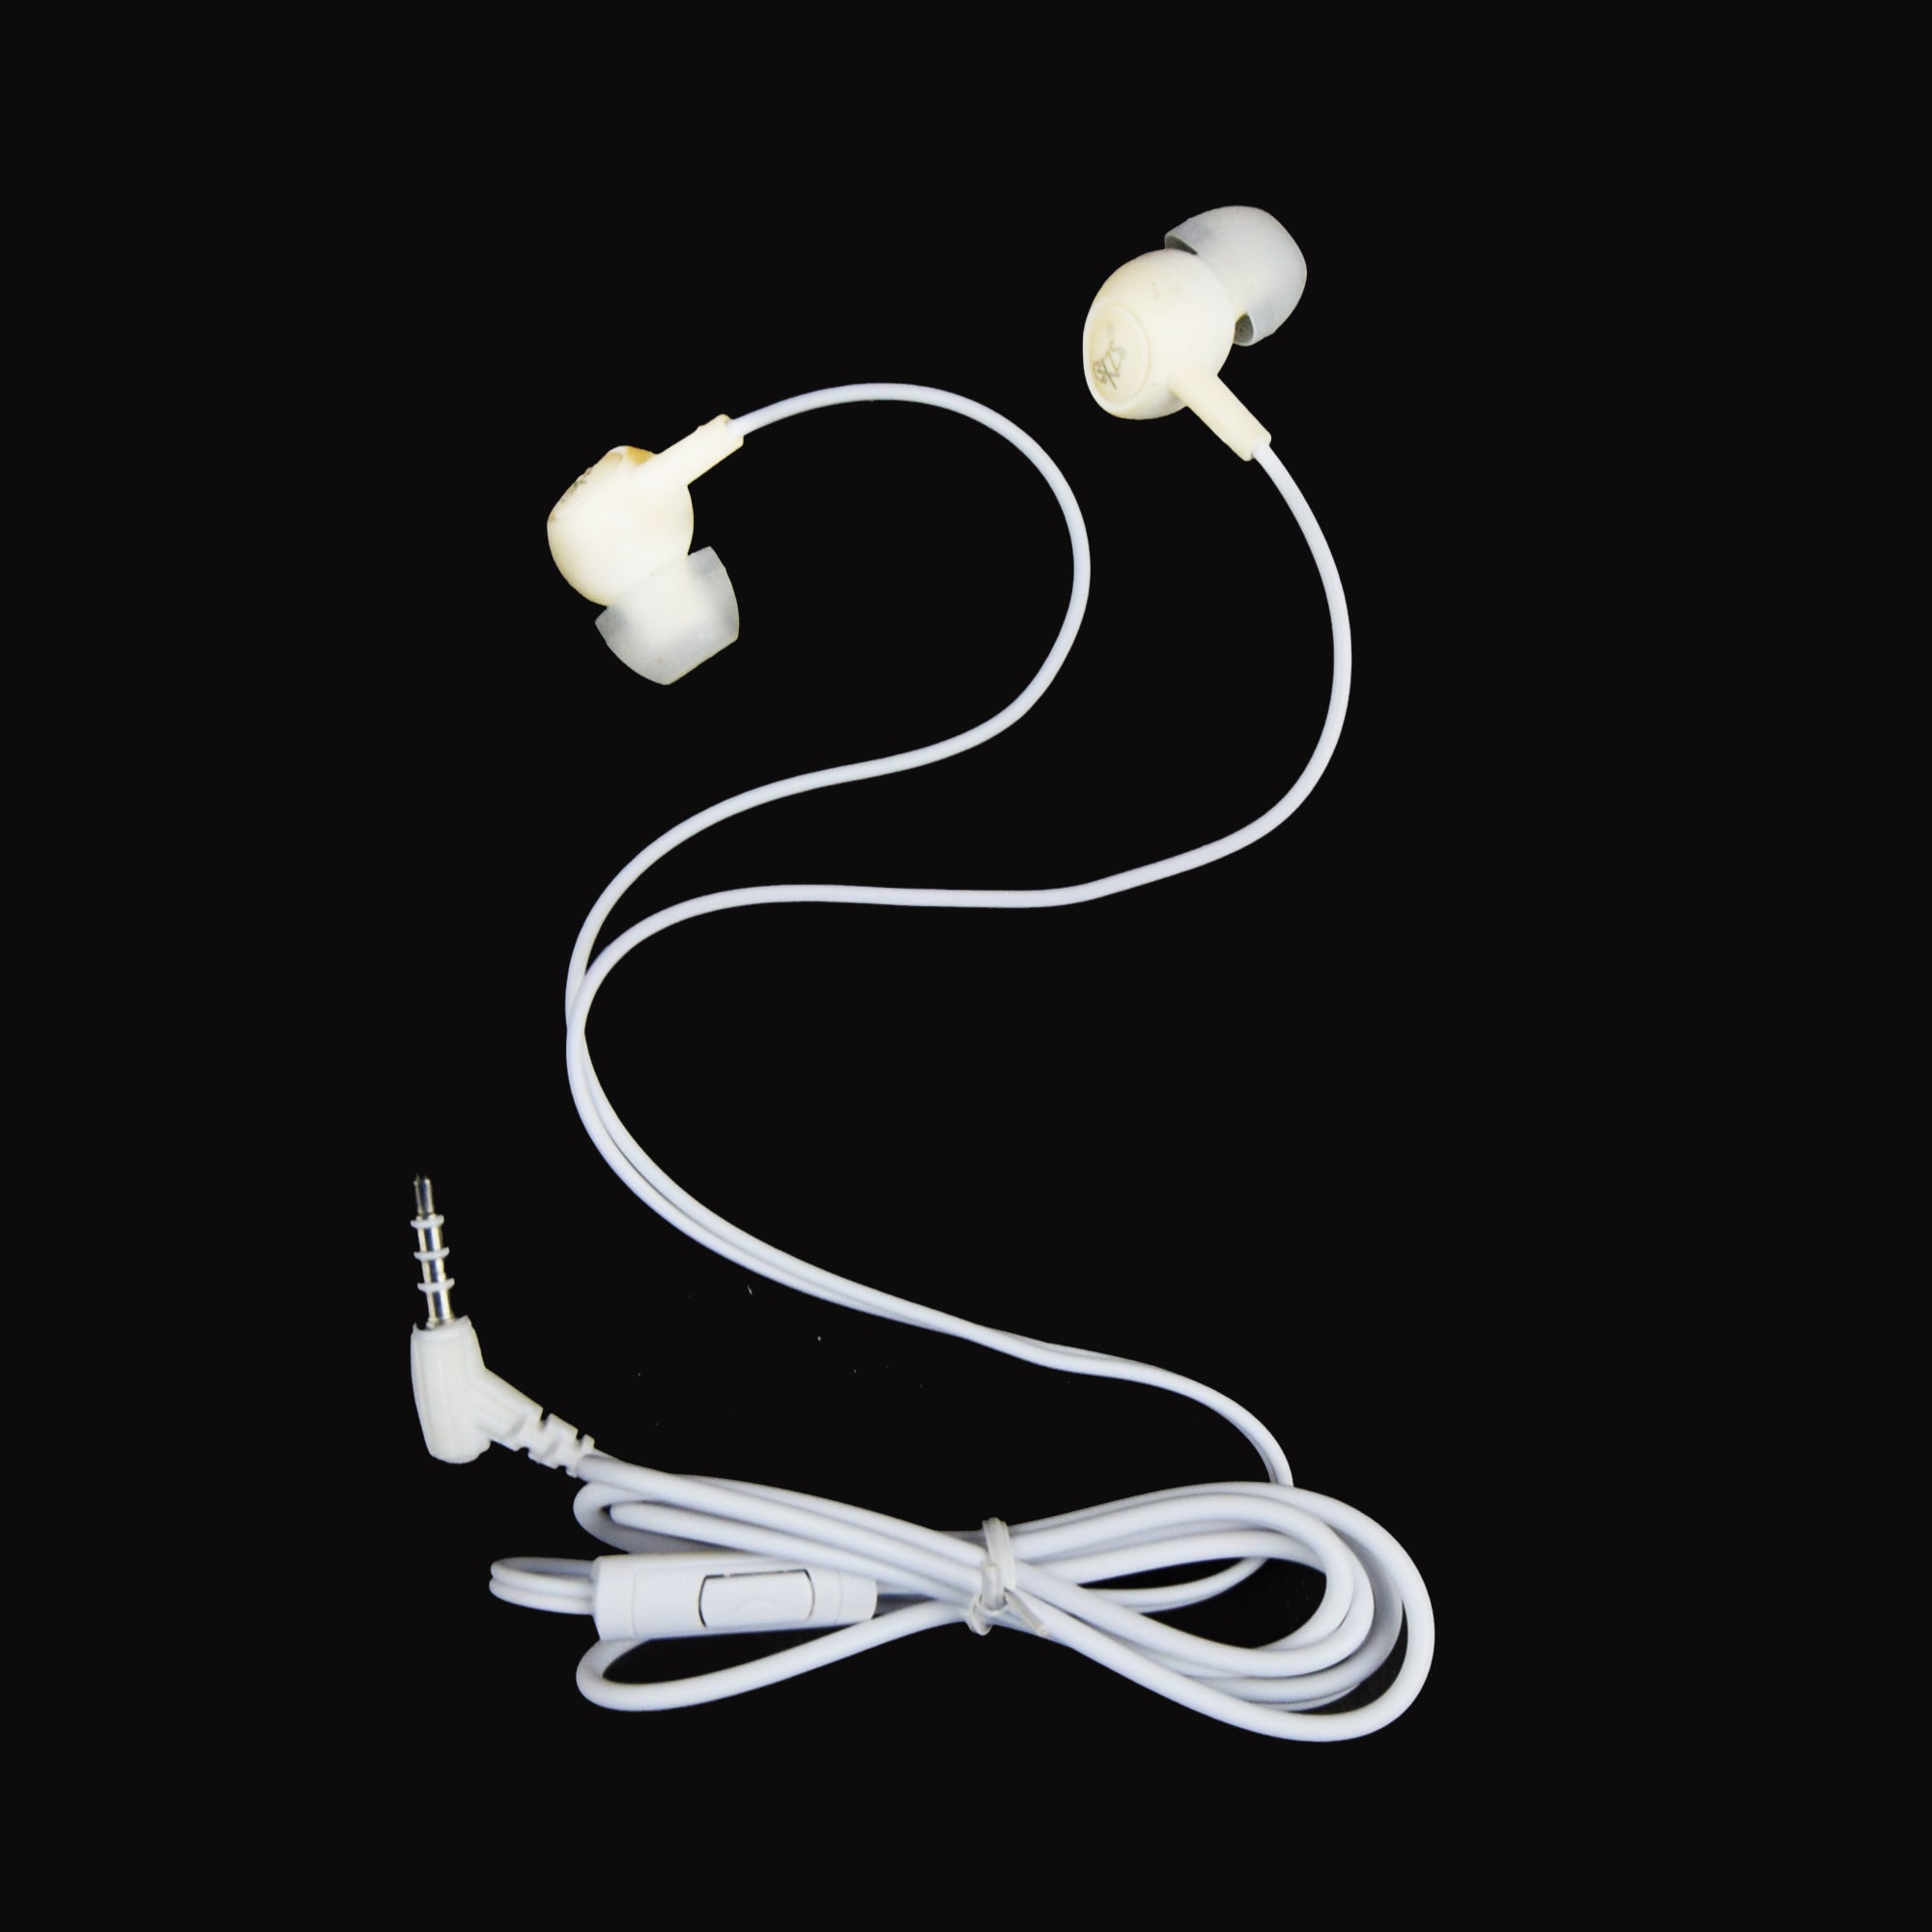 Xzs M-5 Universal Music Handsfree with Mic for calling